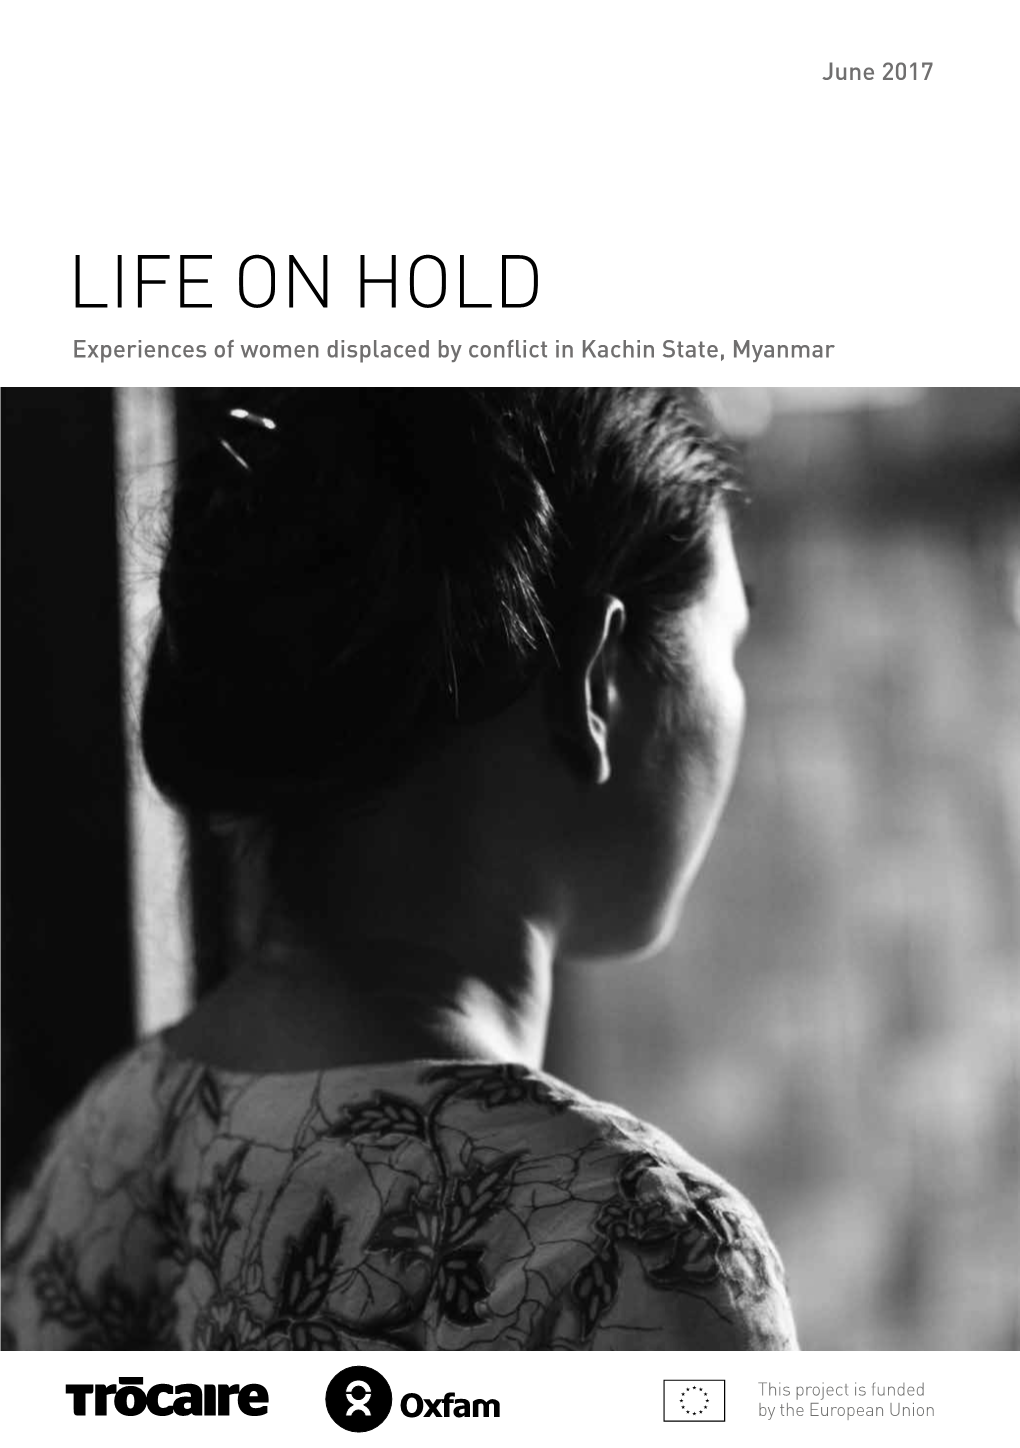 LIFE on HOLD Experiences of Women Displaced by Conflict in Kachin State, Myanmar